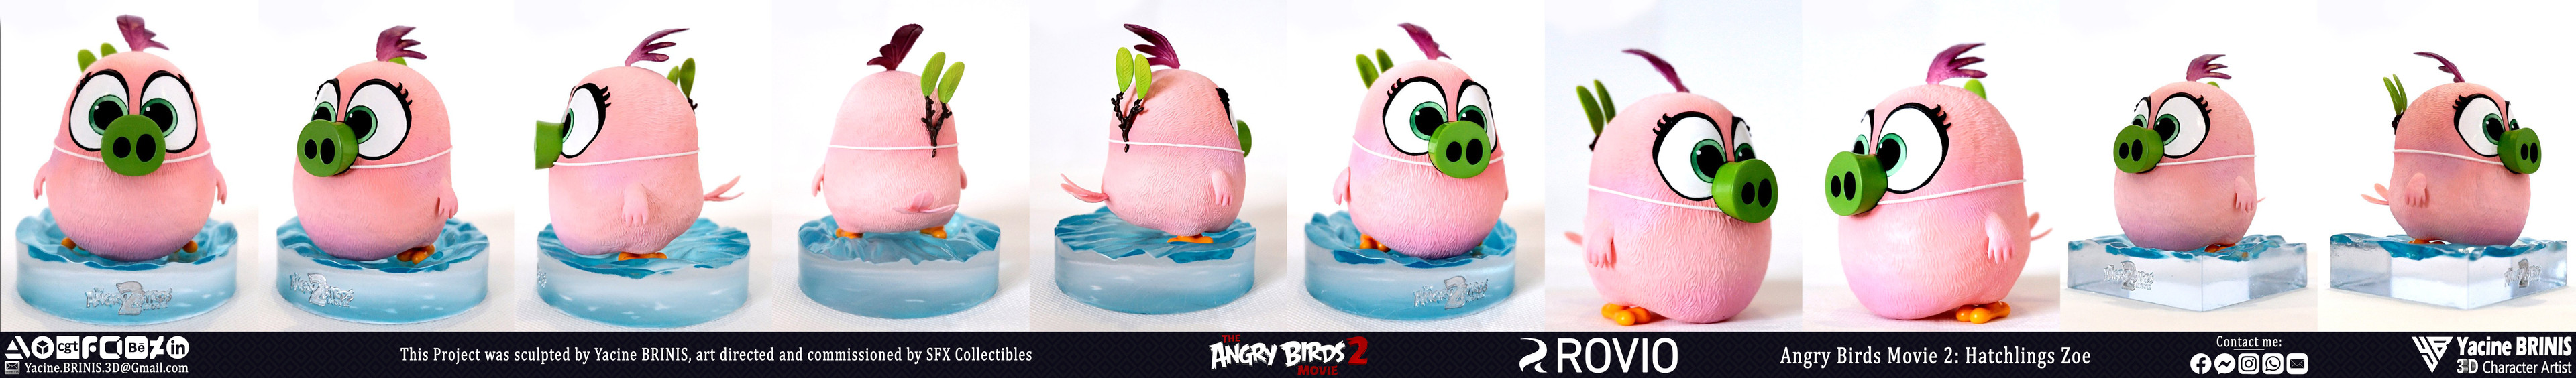 Angry Birds Movie 2 Rovio Entertainment Sculpted by Yacine BRINIS 046 Hatchlings Zoe Printed by SFX Collectibles